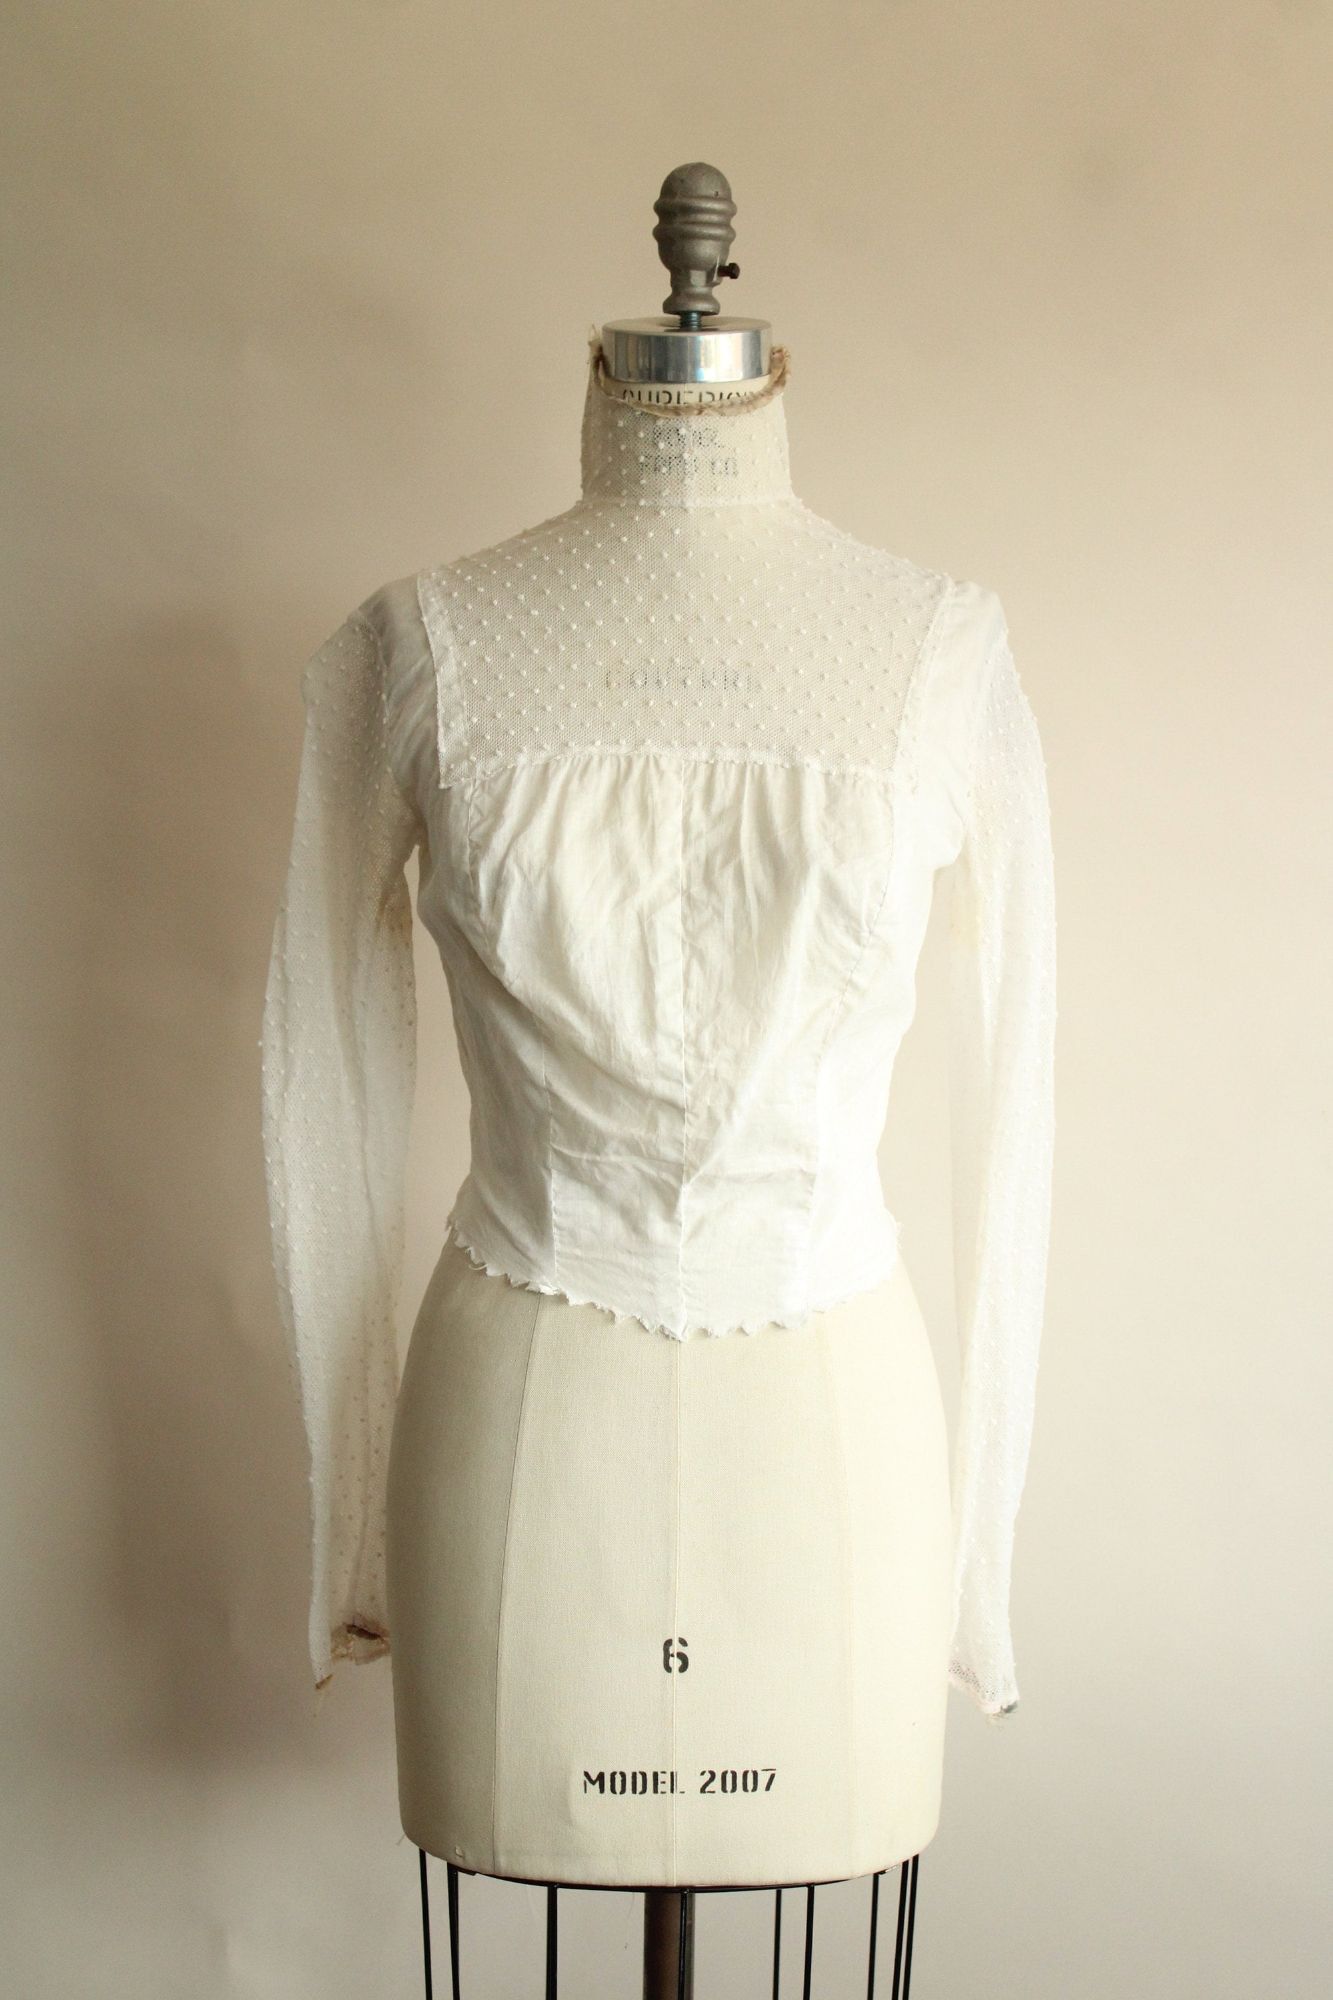 Vintage Antique 1900s Blouse In White With Lace Front. Pigeon Bust Size M / US 6-8 / IT 42-44 - 2 Preview